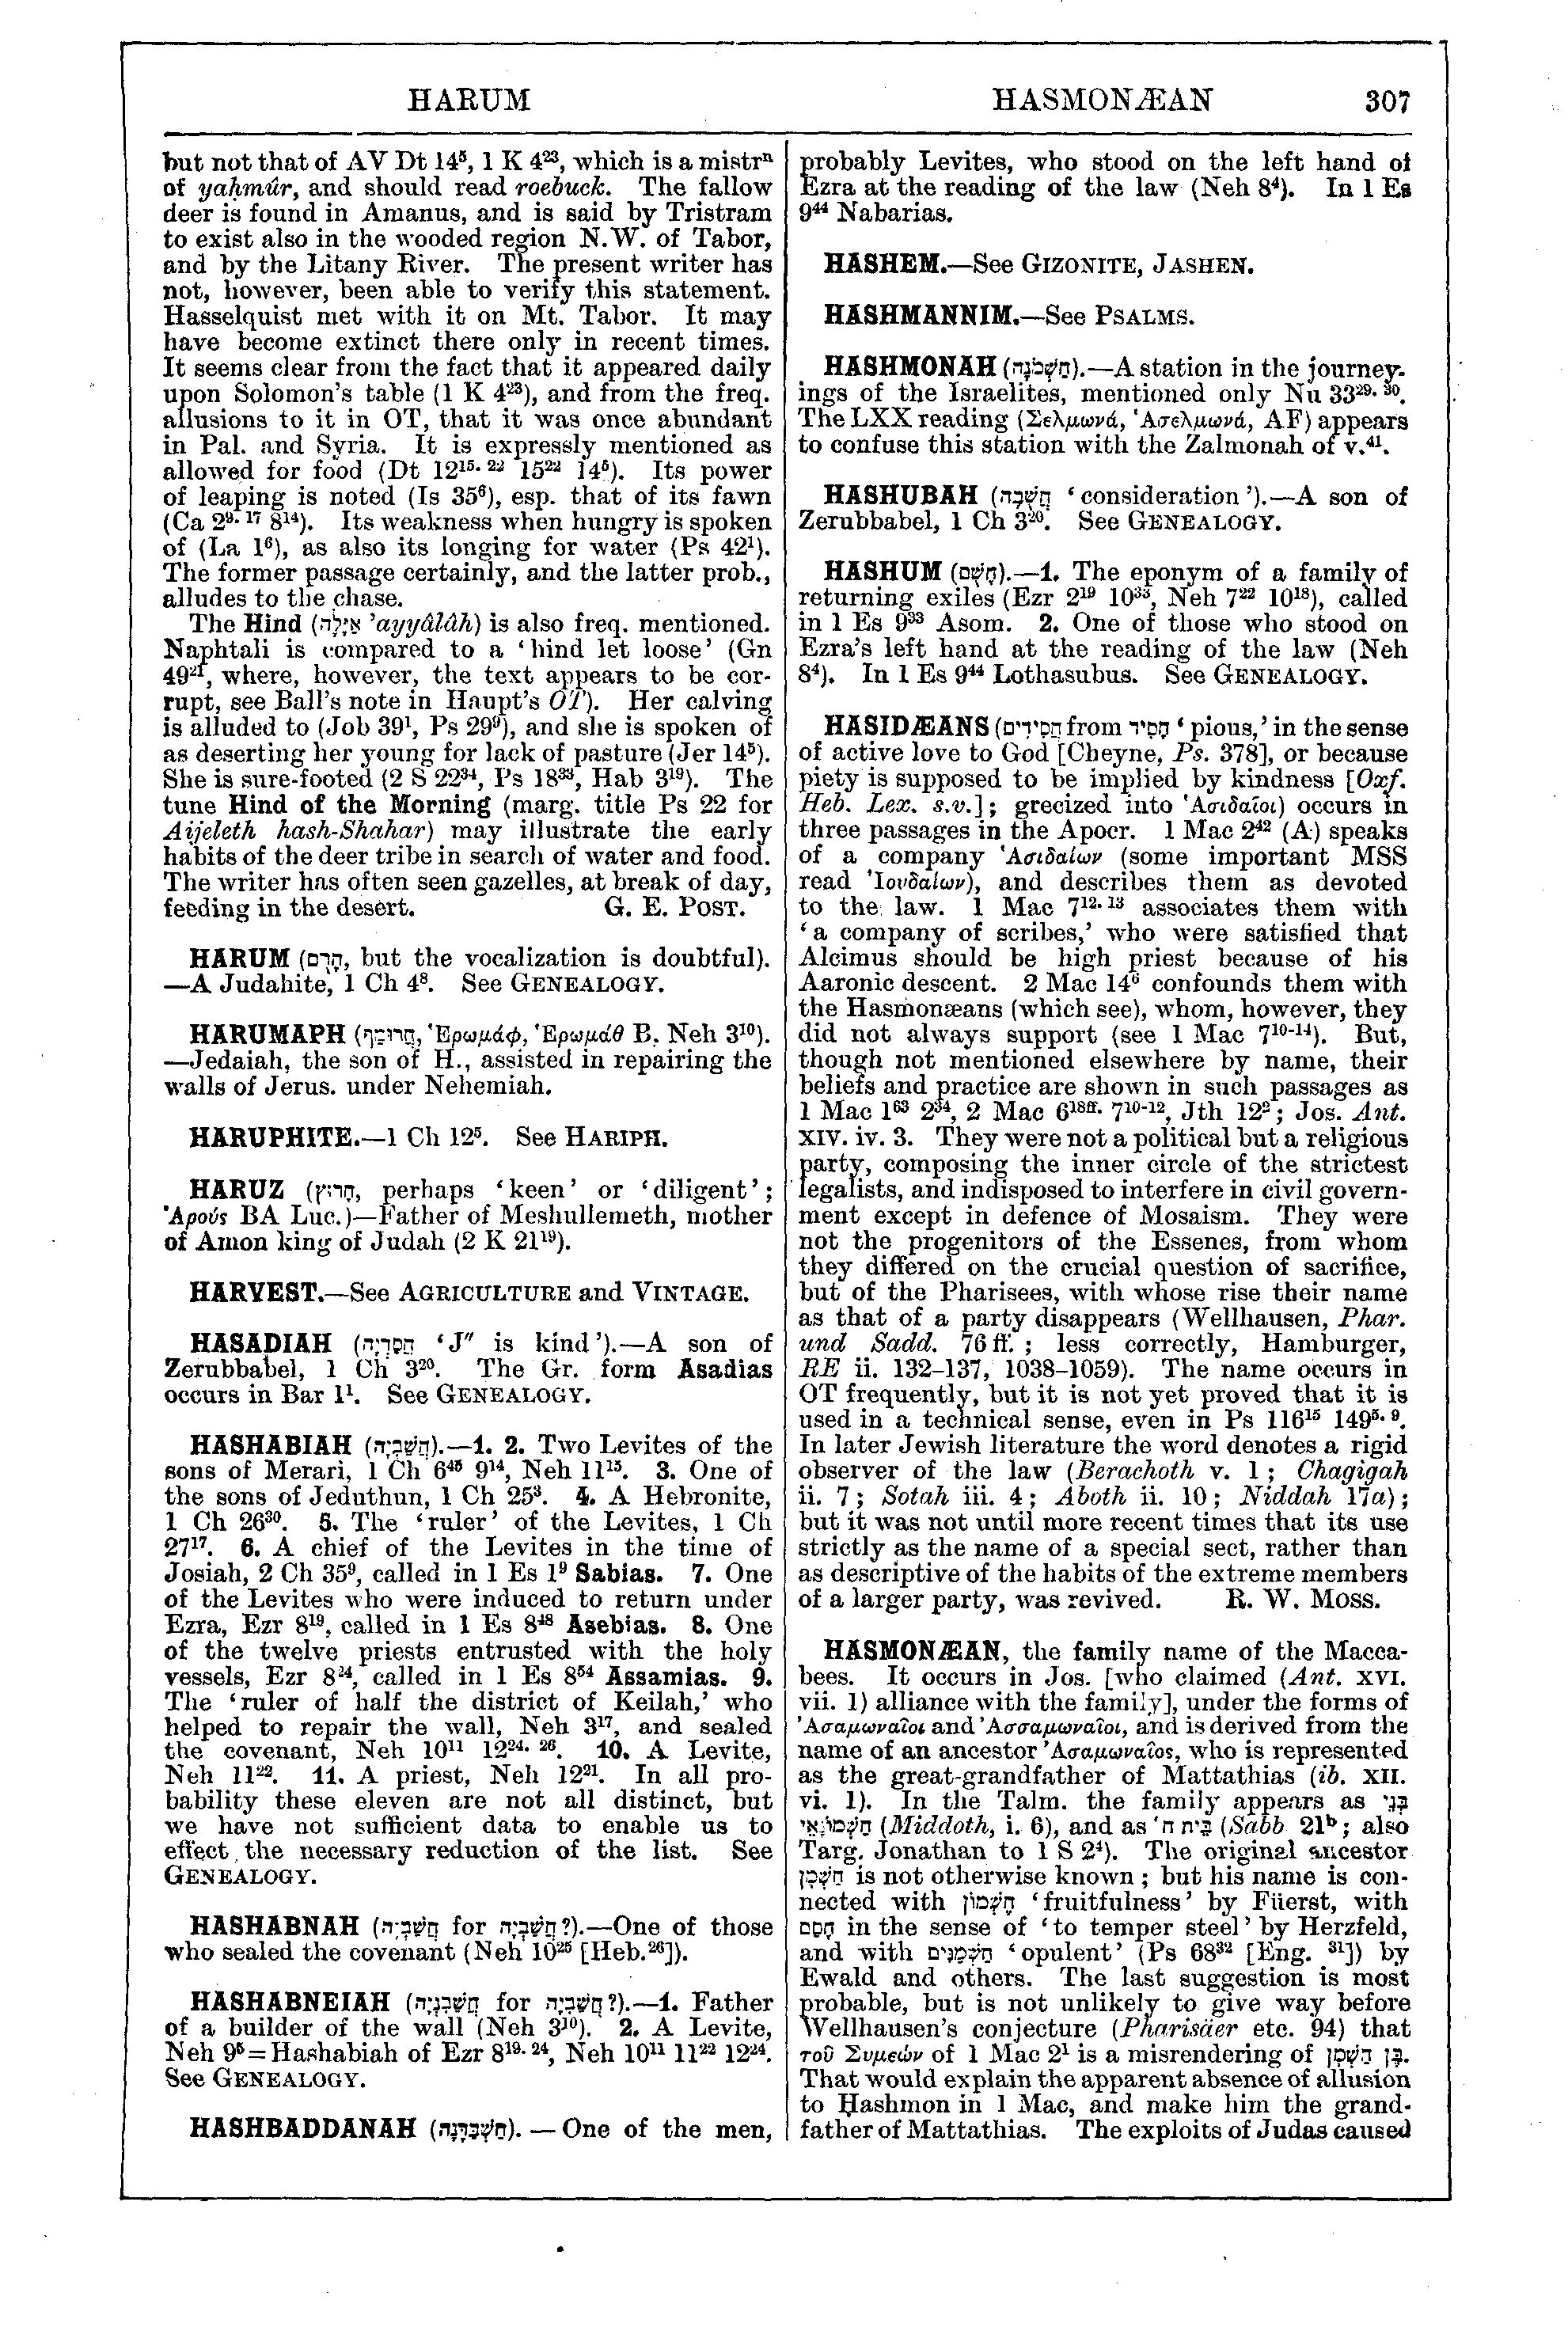 Image of page 307